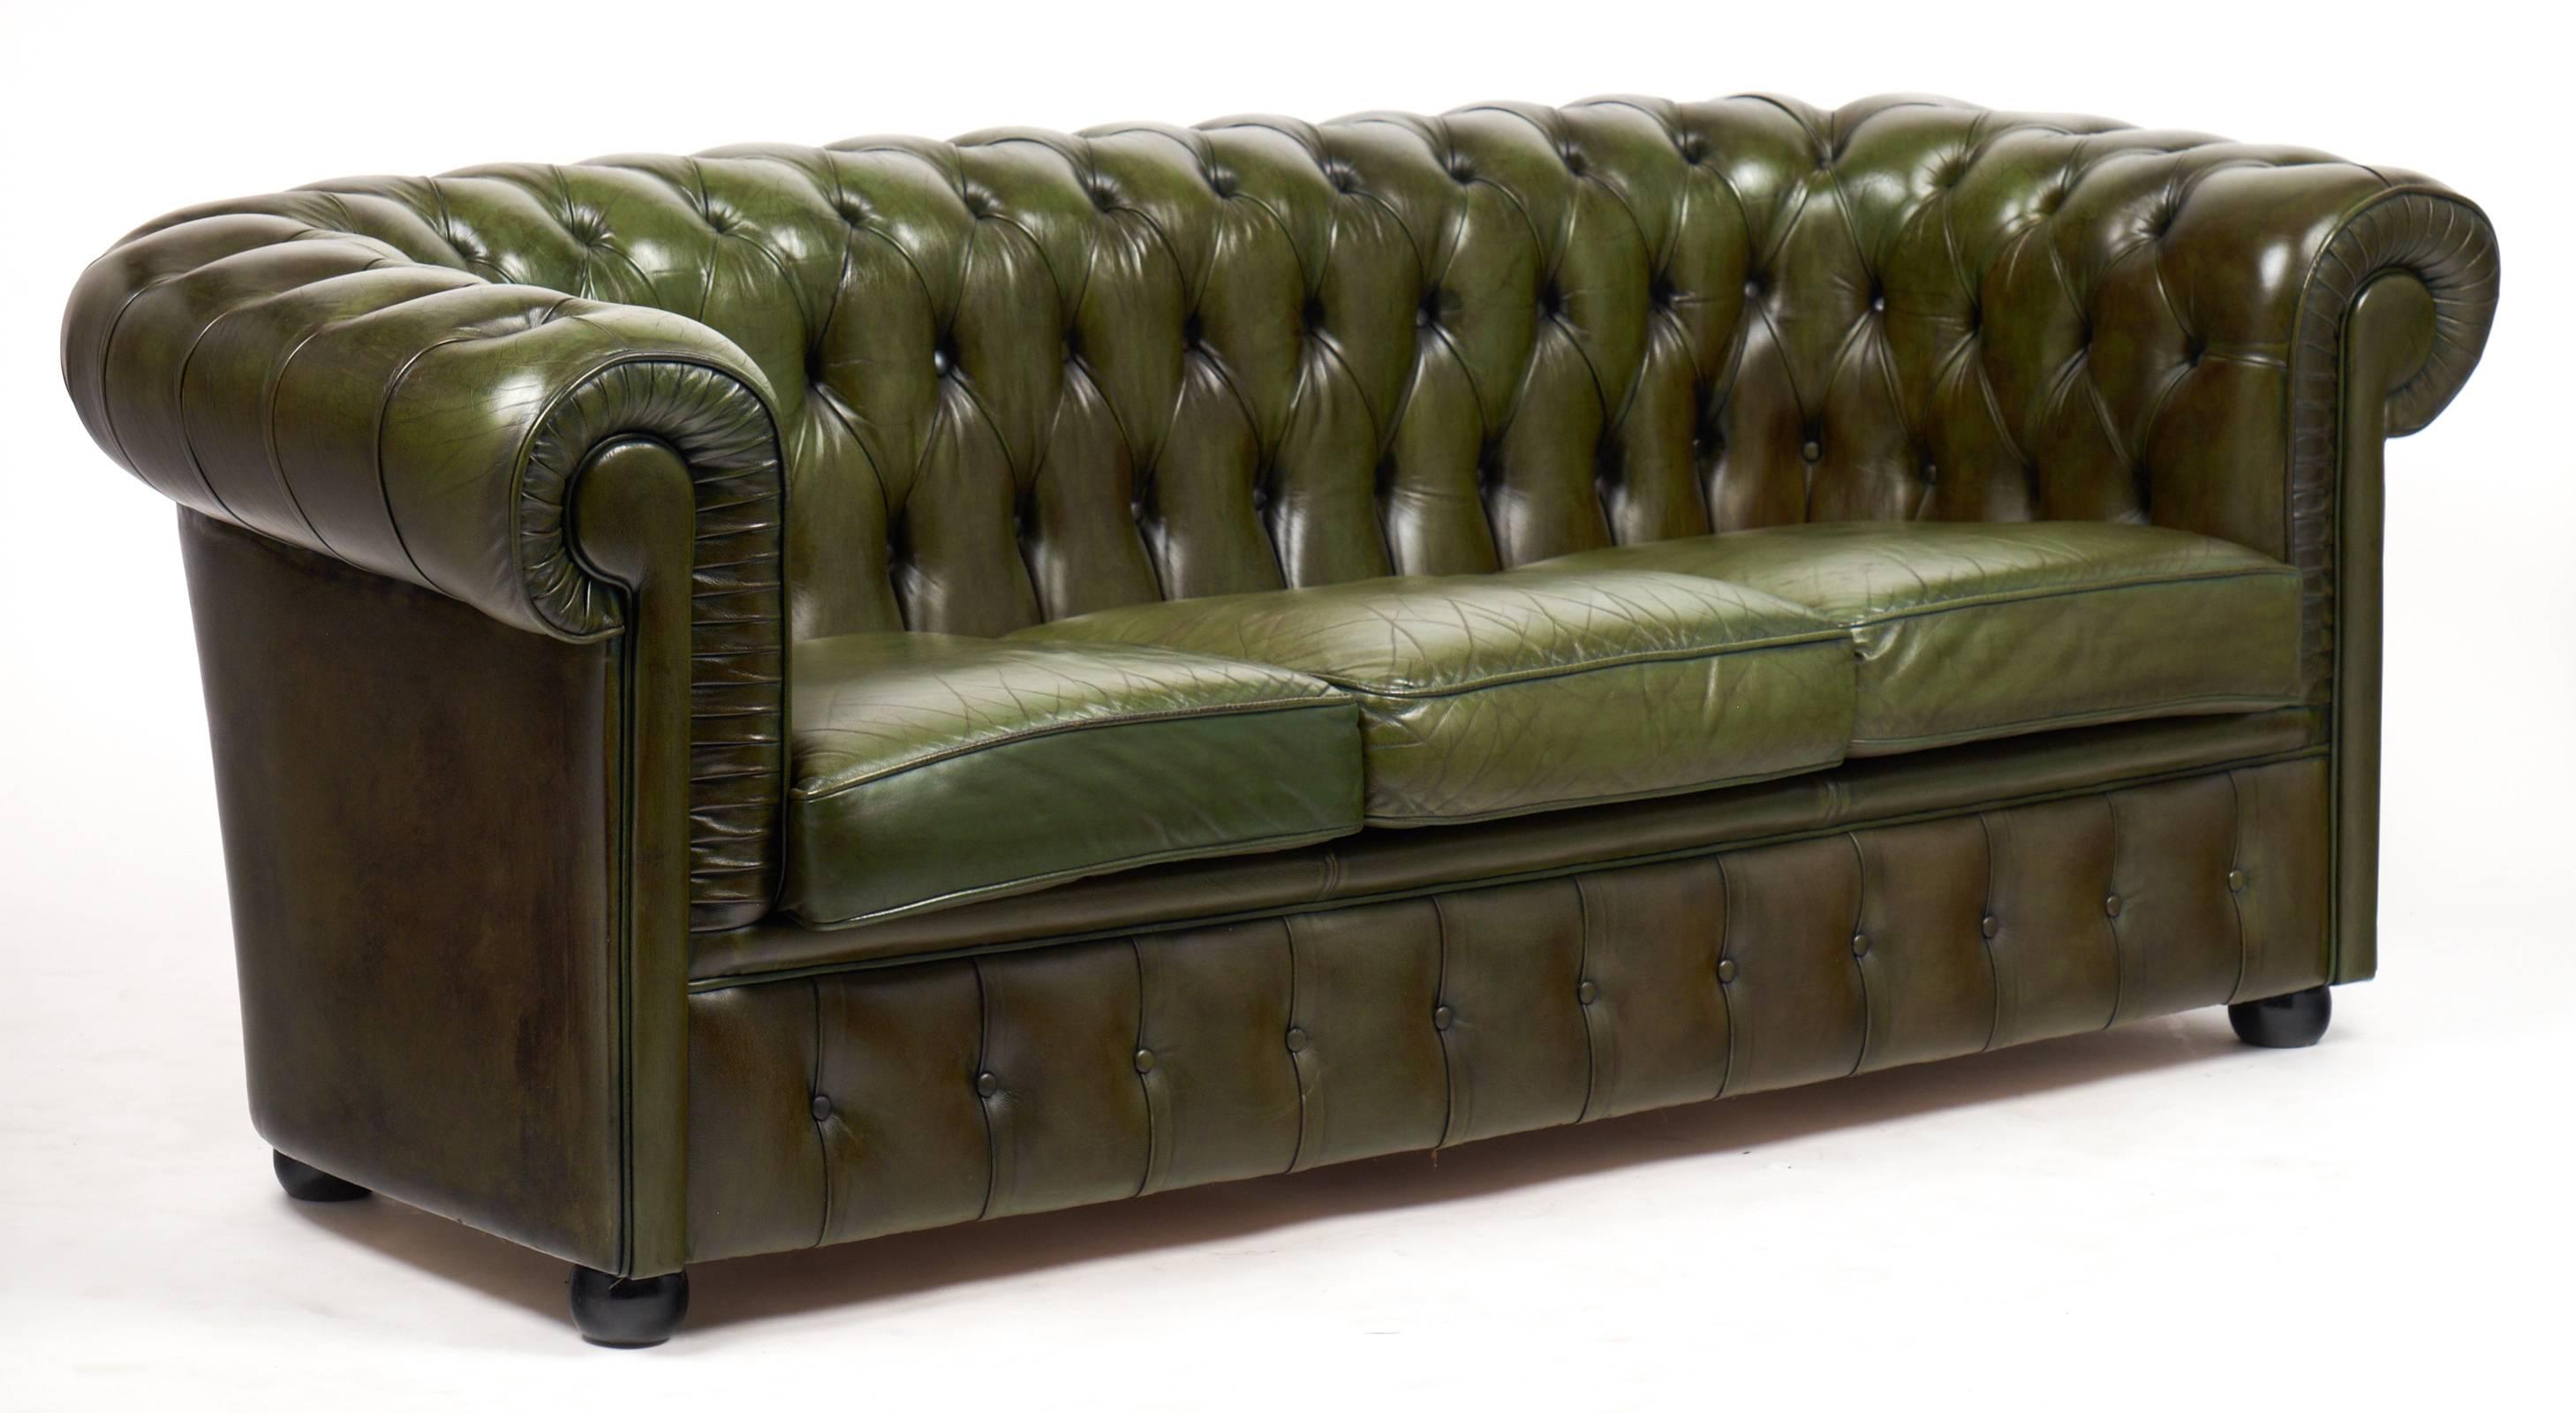 Patinated English Vintage Green or Bronze Chesterfield Sofa